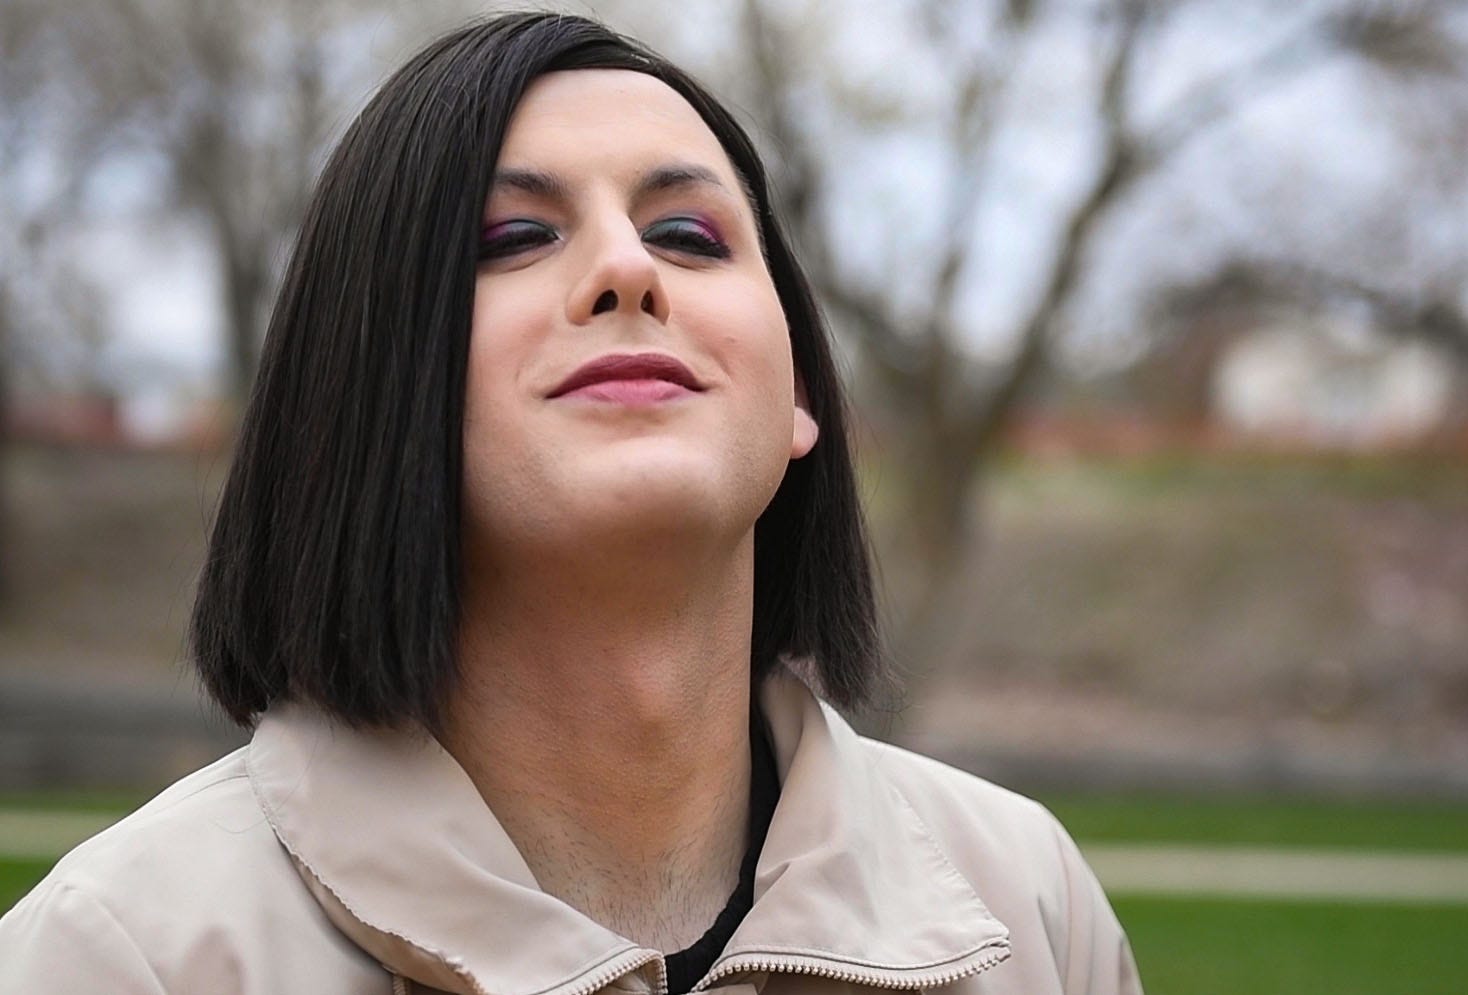 While at first she felt some apprehension about her ability to "pass," or blend in with cisgender people in public, it didn't take long for Morgan Metzinger to find her confidence.